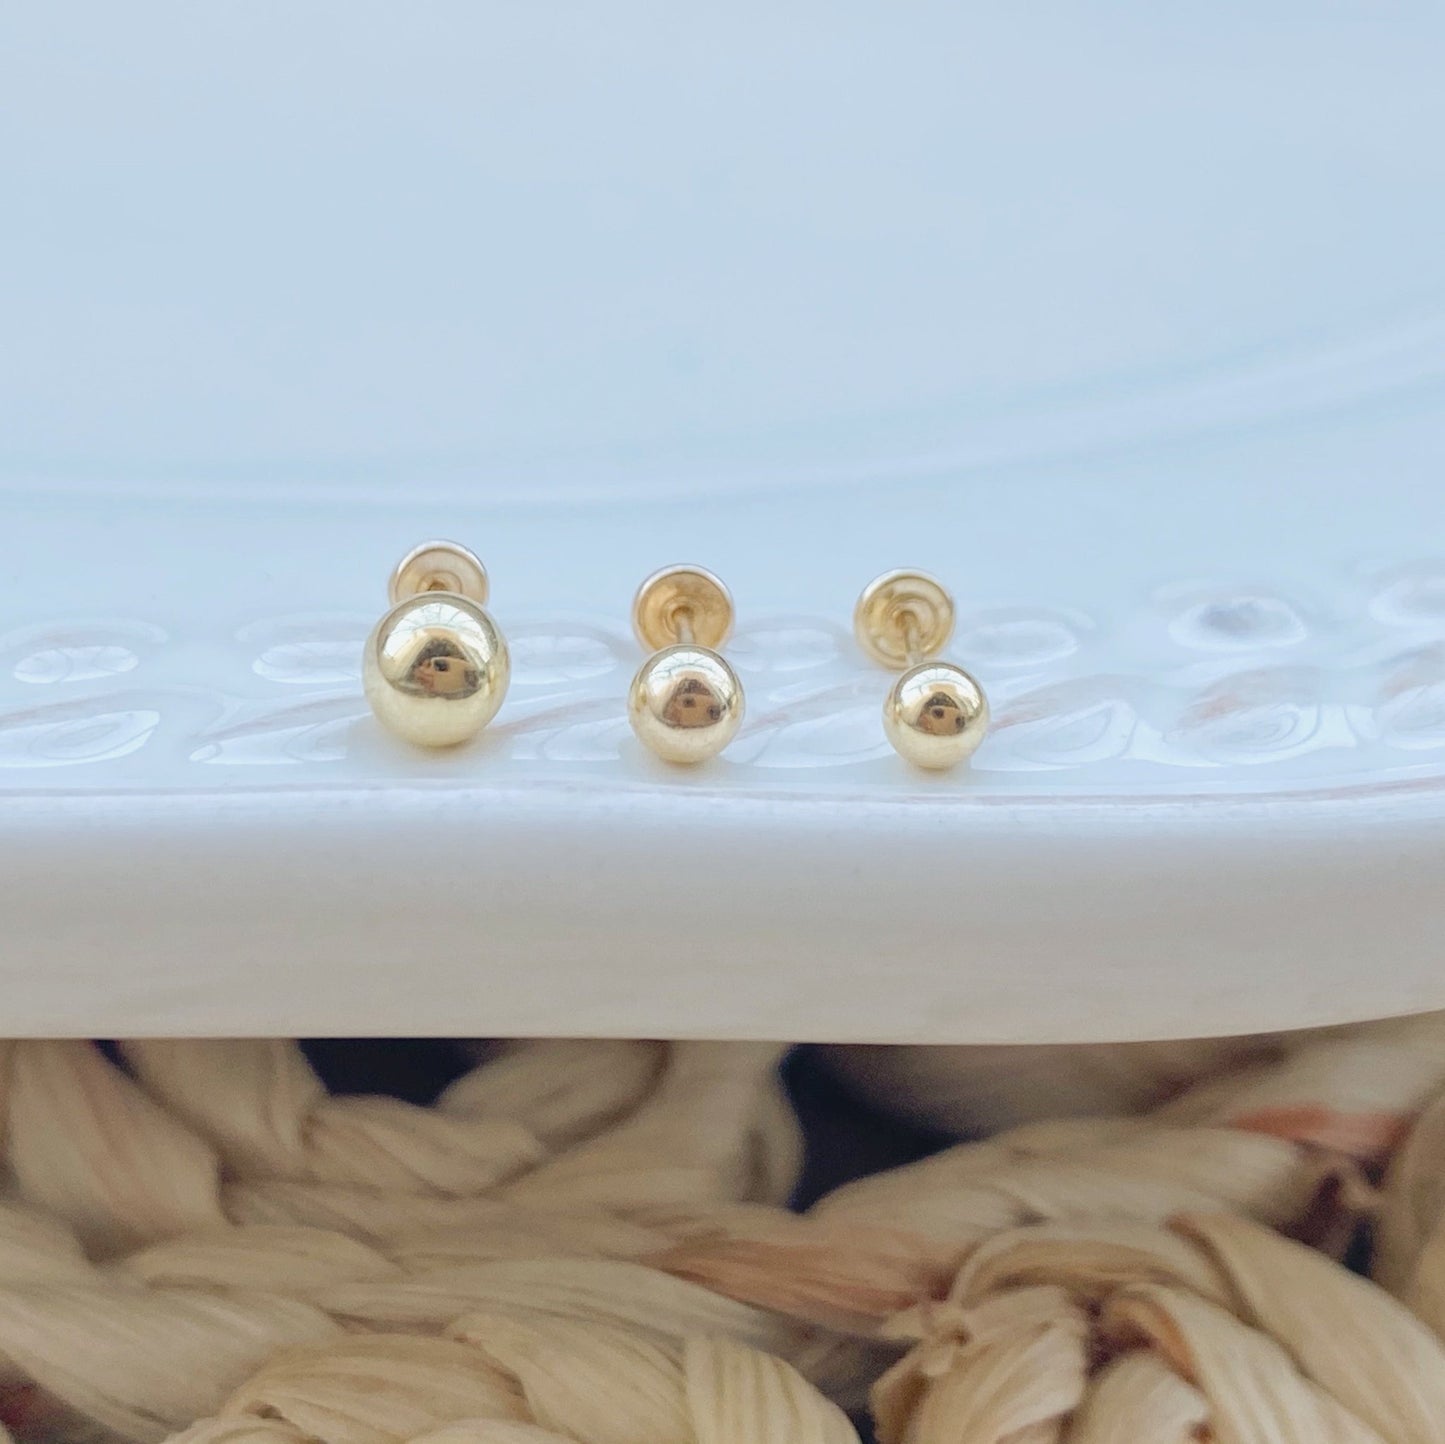 Get ready to shine with these 4mm gold earrings. These 14K solid gold studs make the perfect holiday gift or stocking stuffer for that special someone in your life.